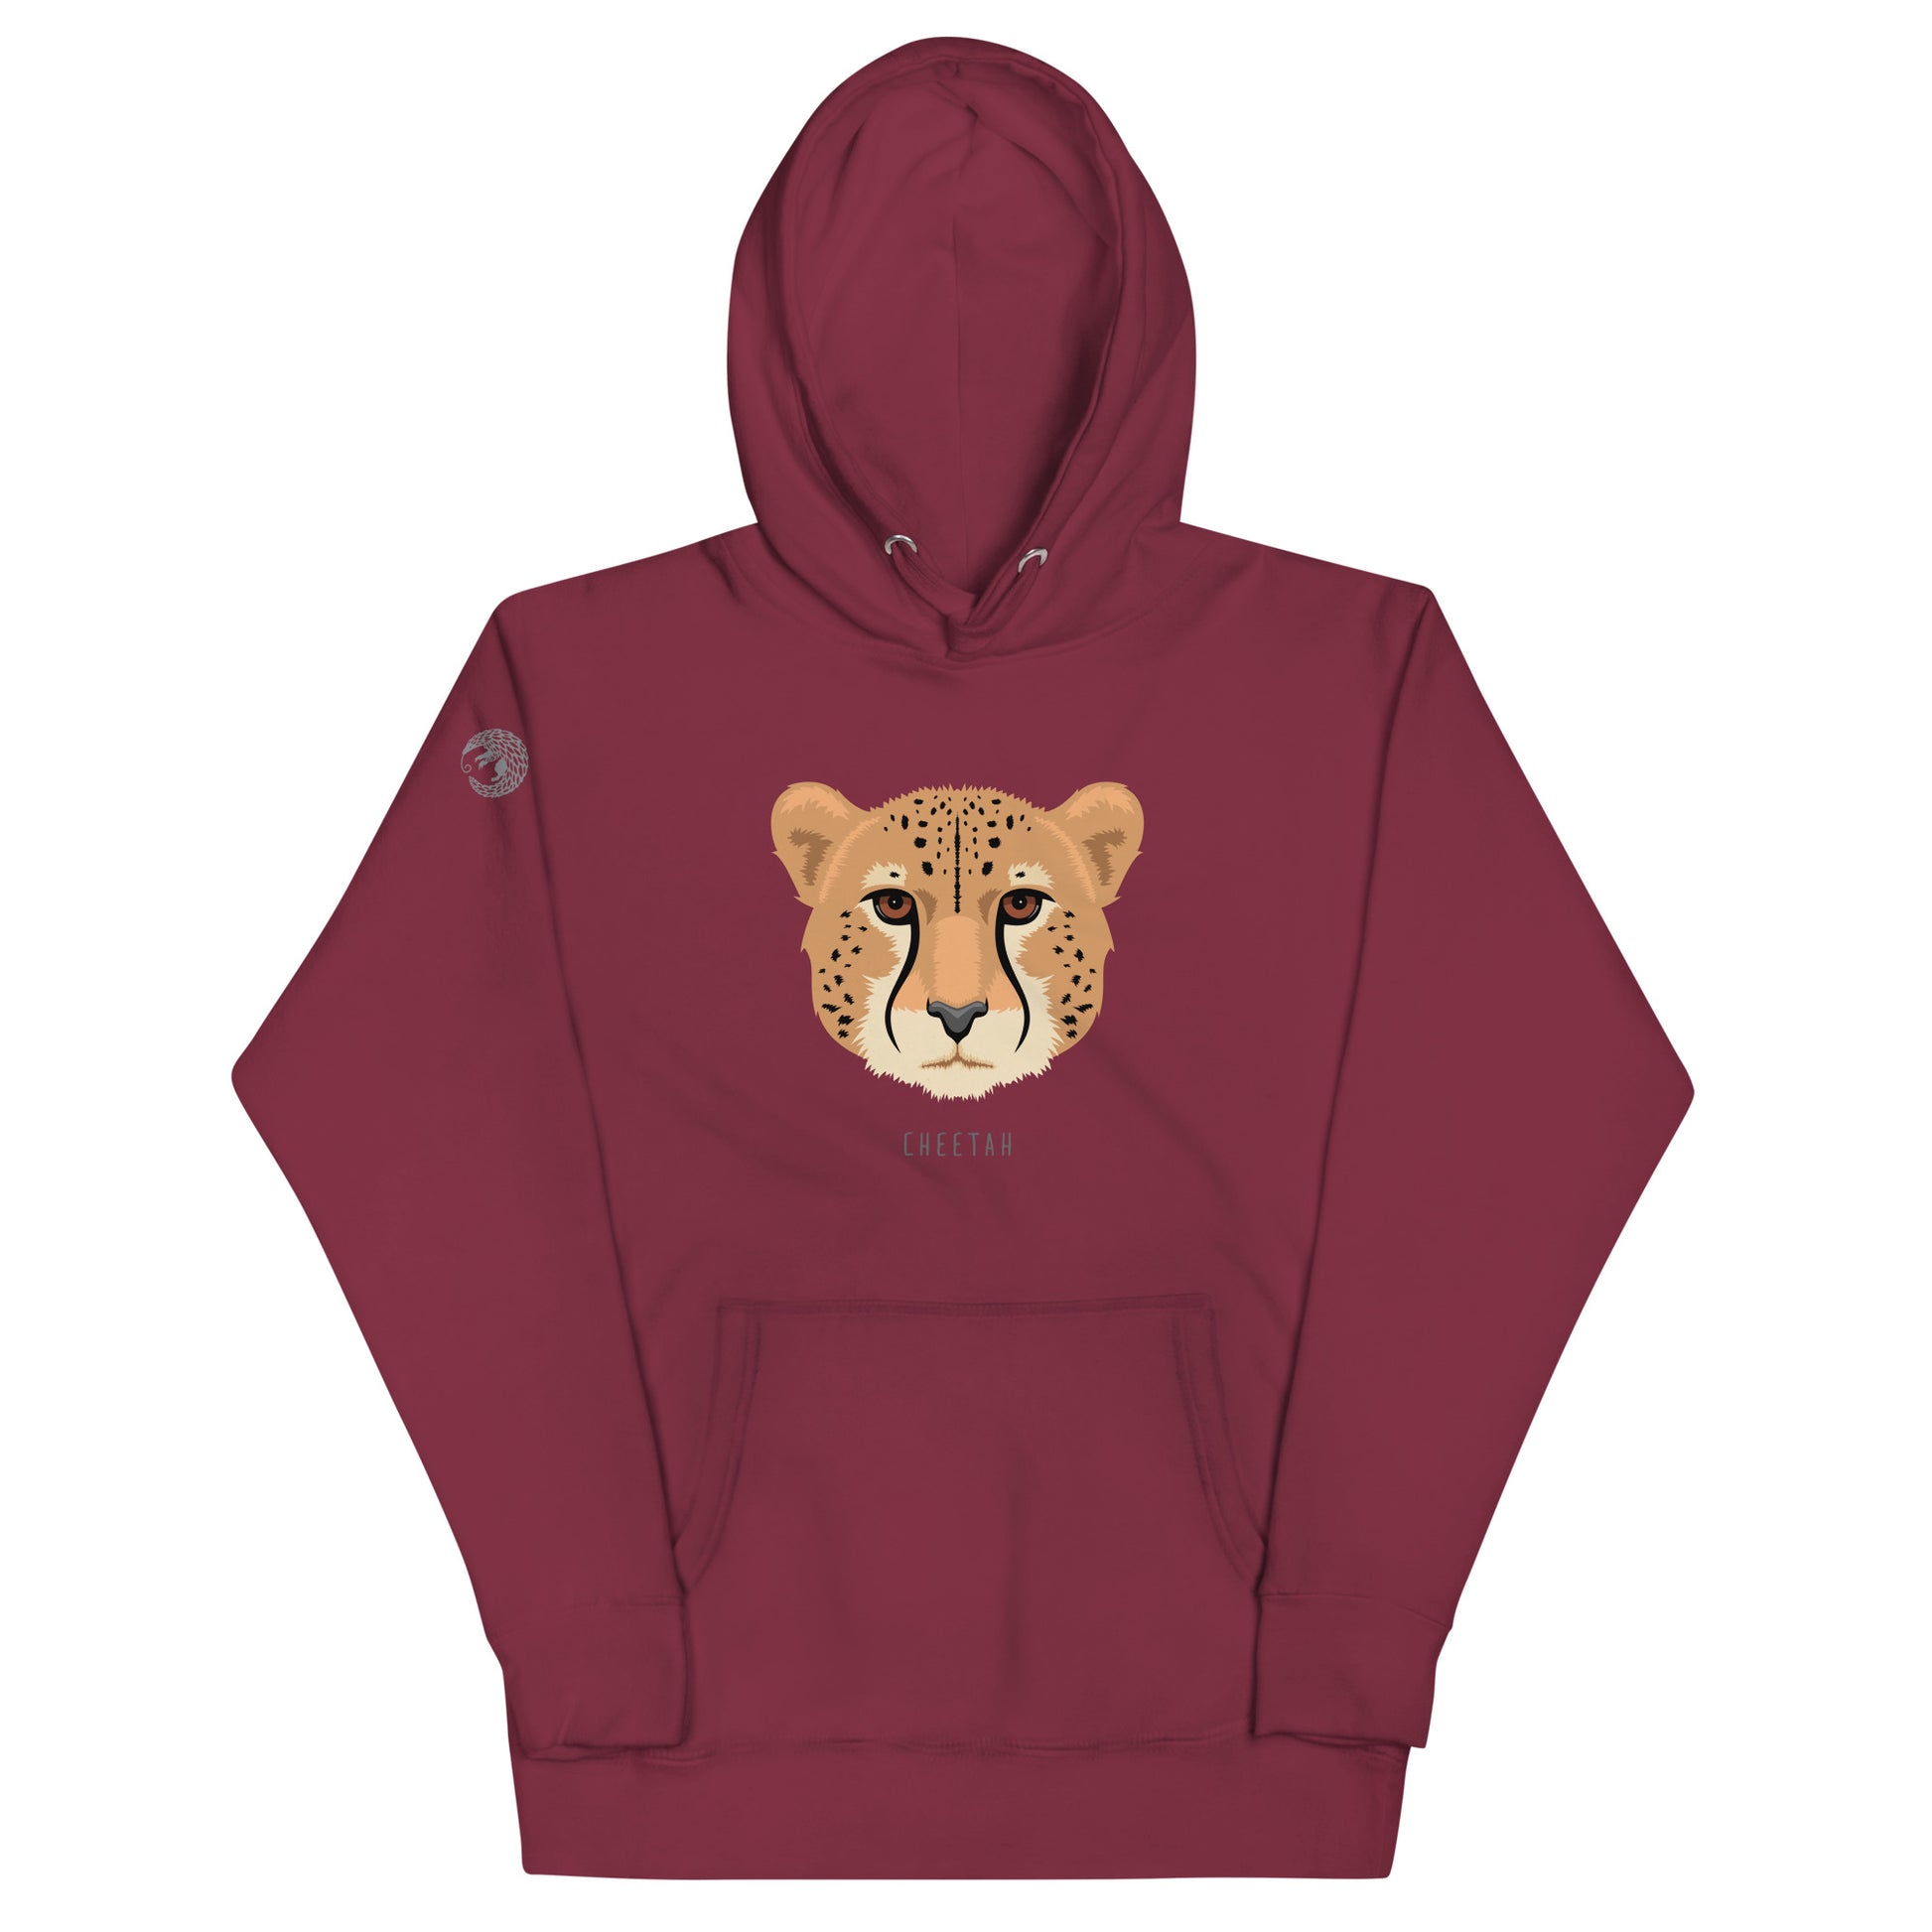 A maroon, hooded, pullover sweatshirt with an illustration of a cheetah's face and thew world "cheetah" beneath it. 